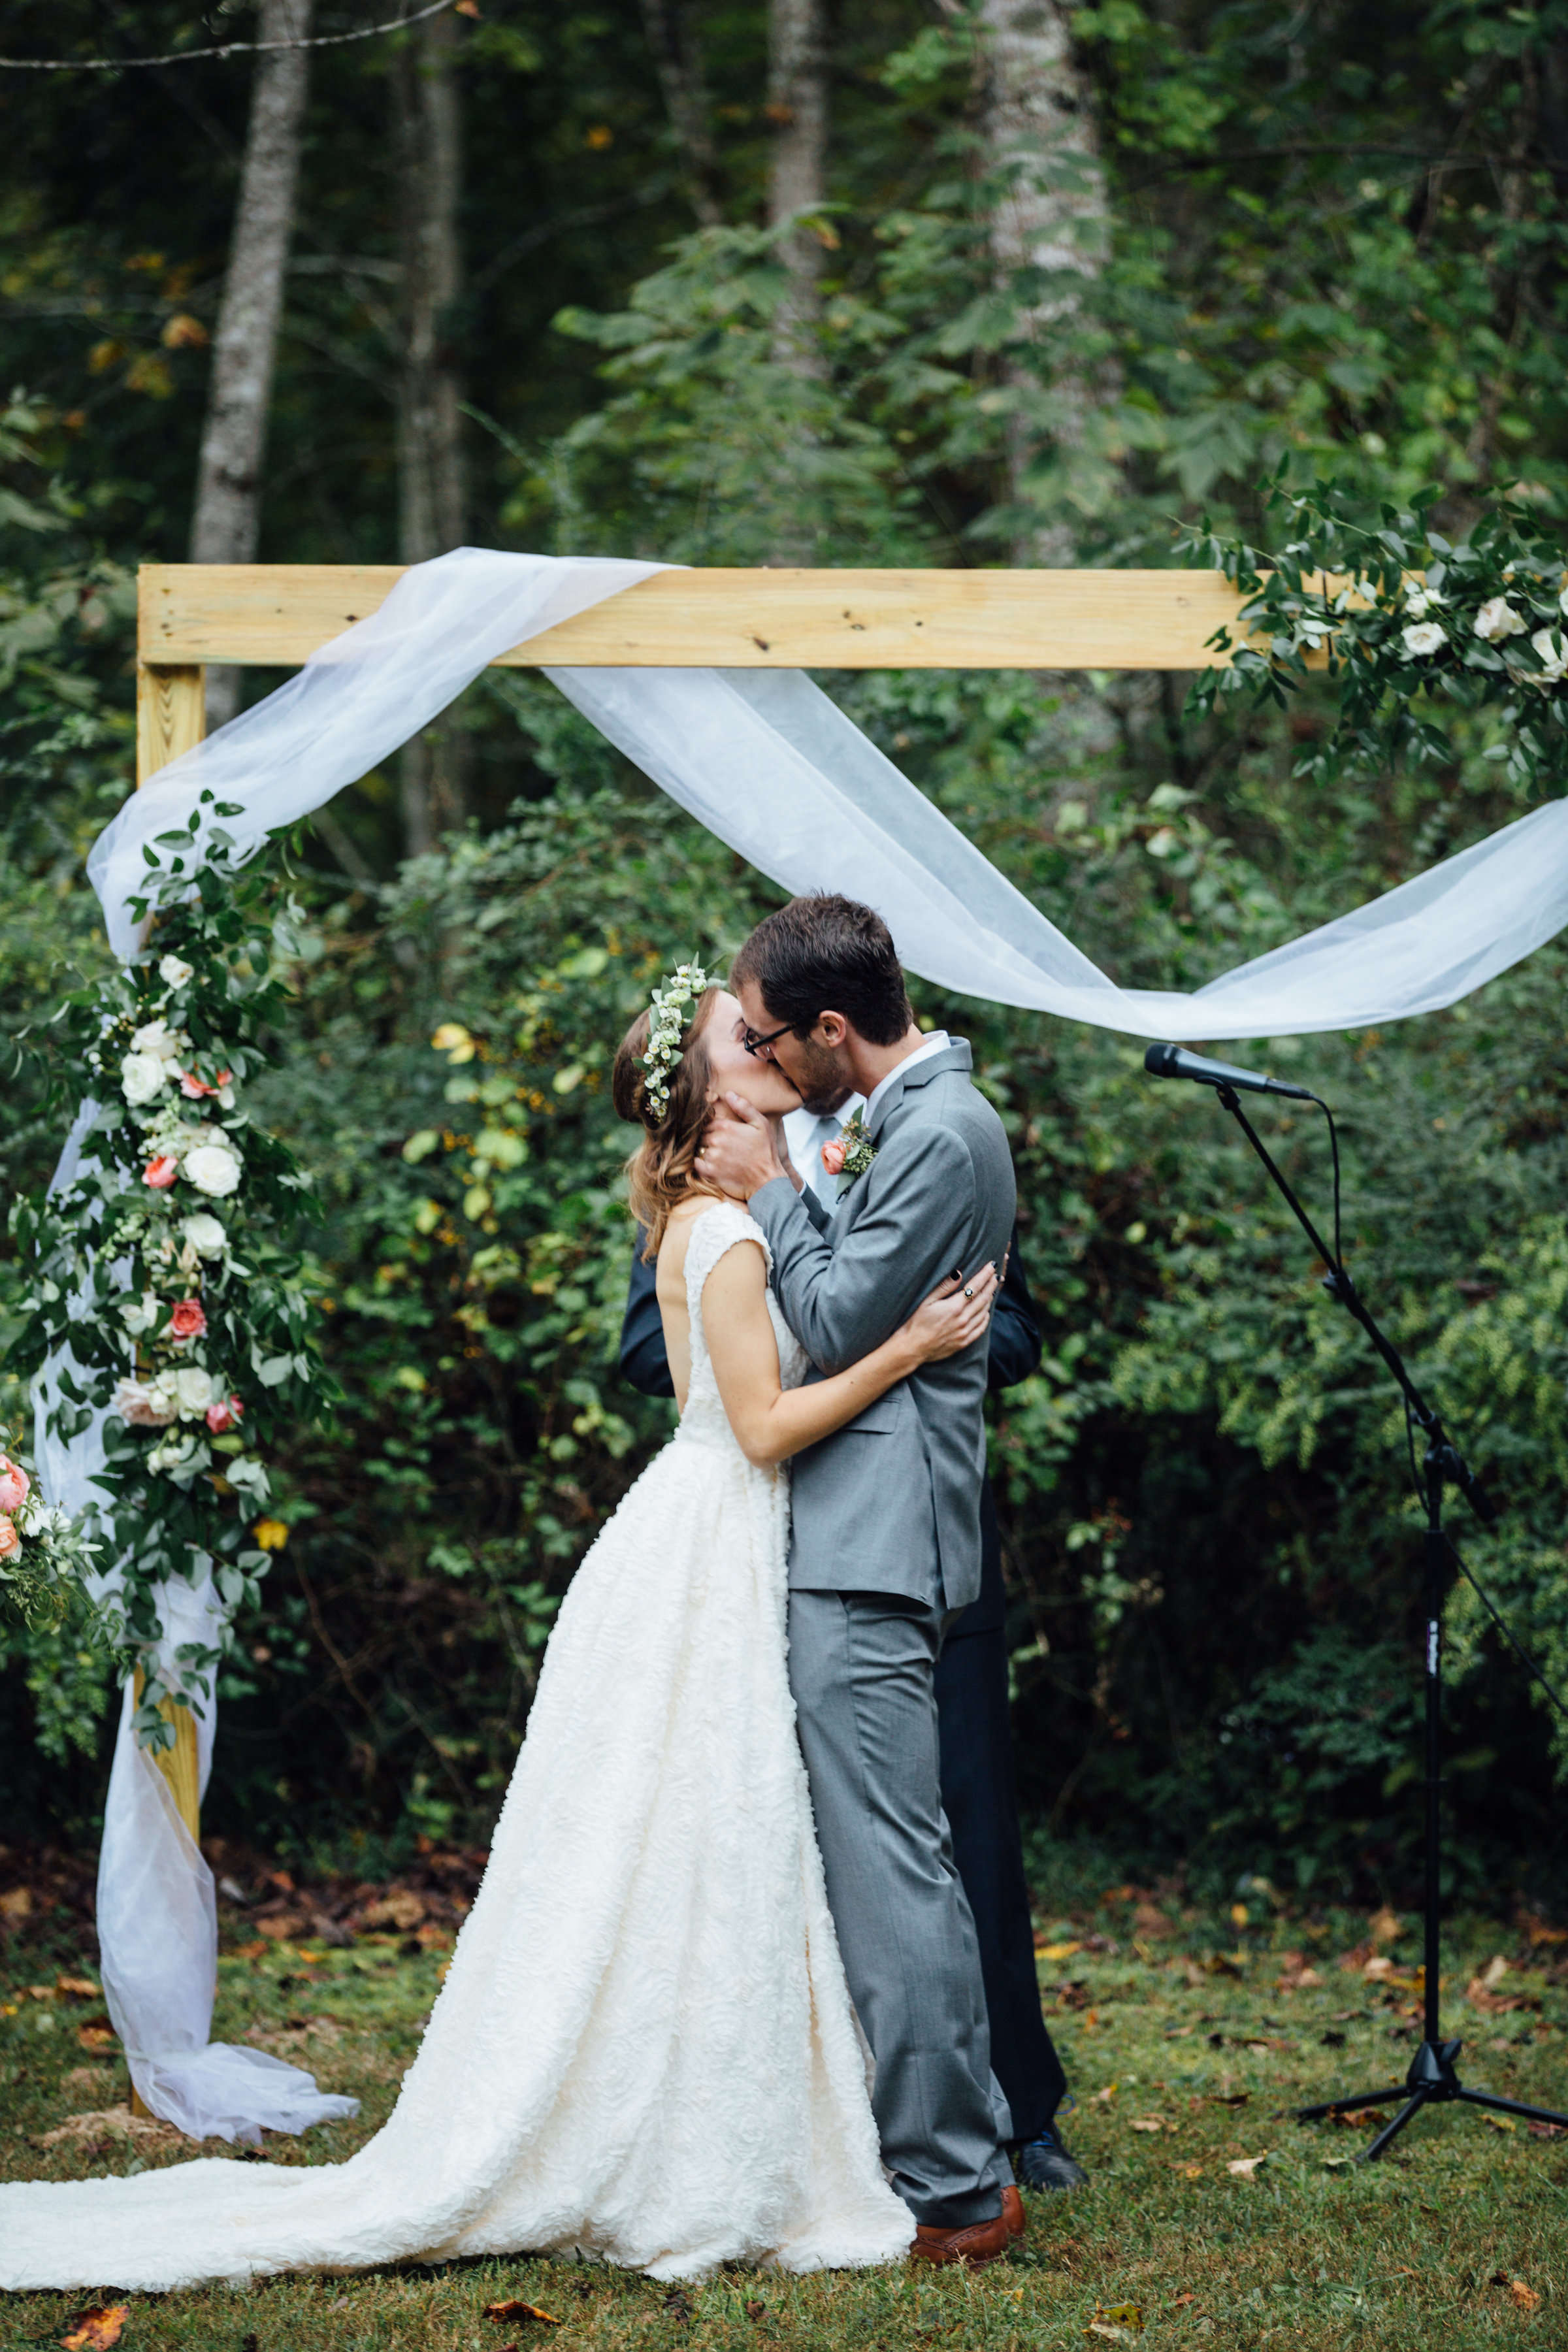 Chic and natural wedding arch // Southern Wedding Floral Design